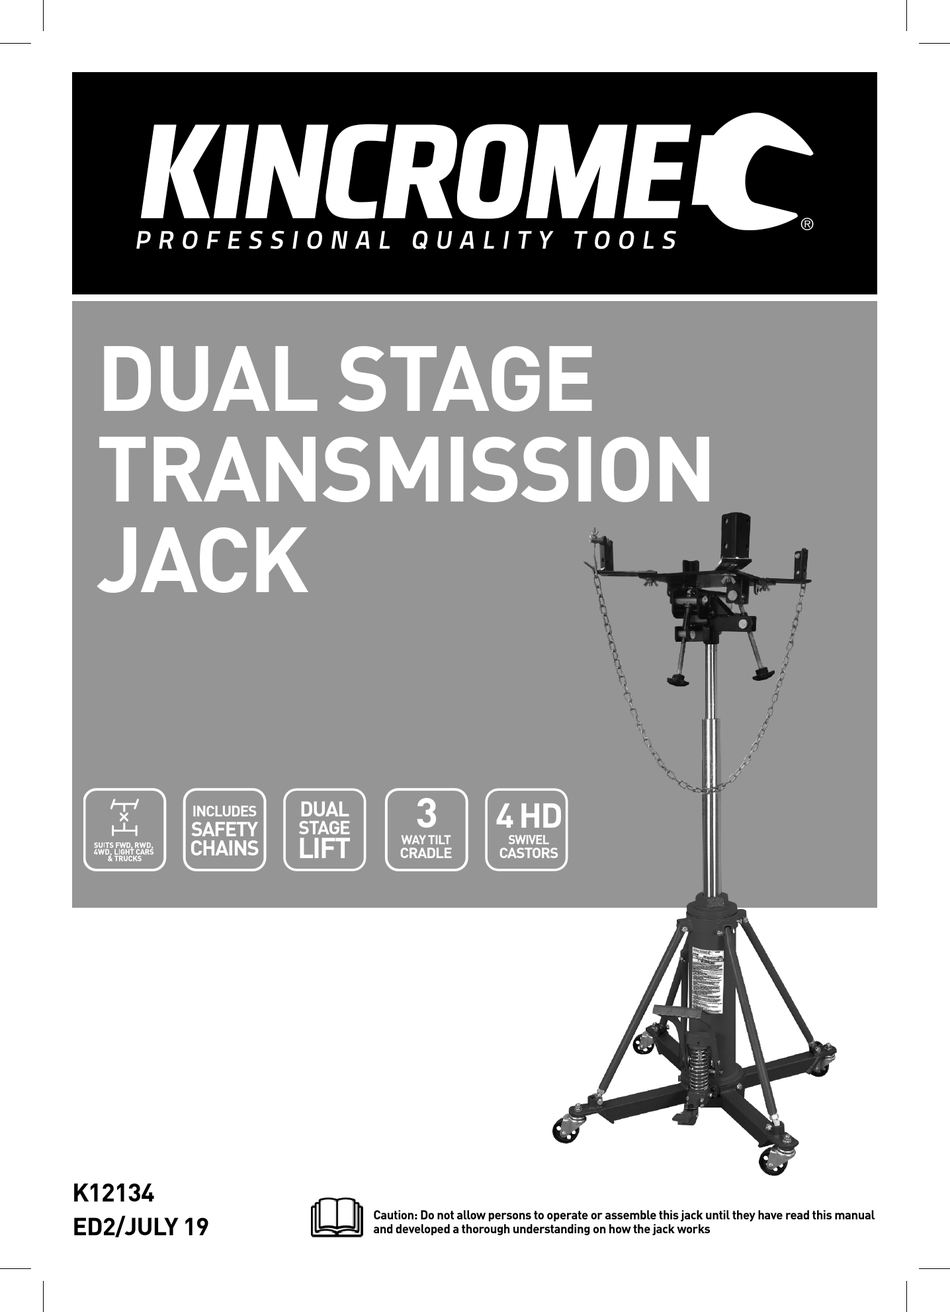 gray transmission jack trouble shooting guide